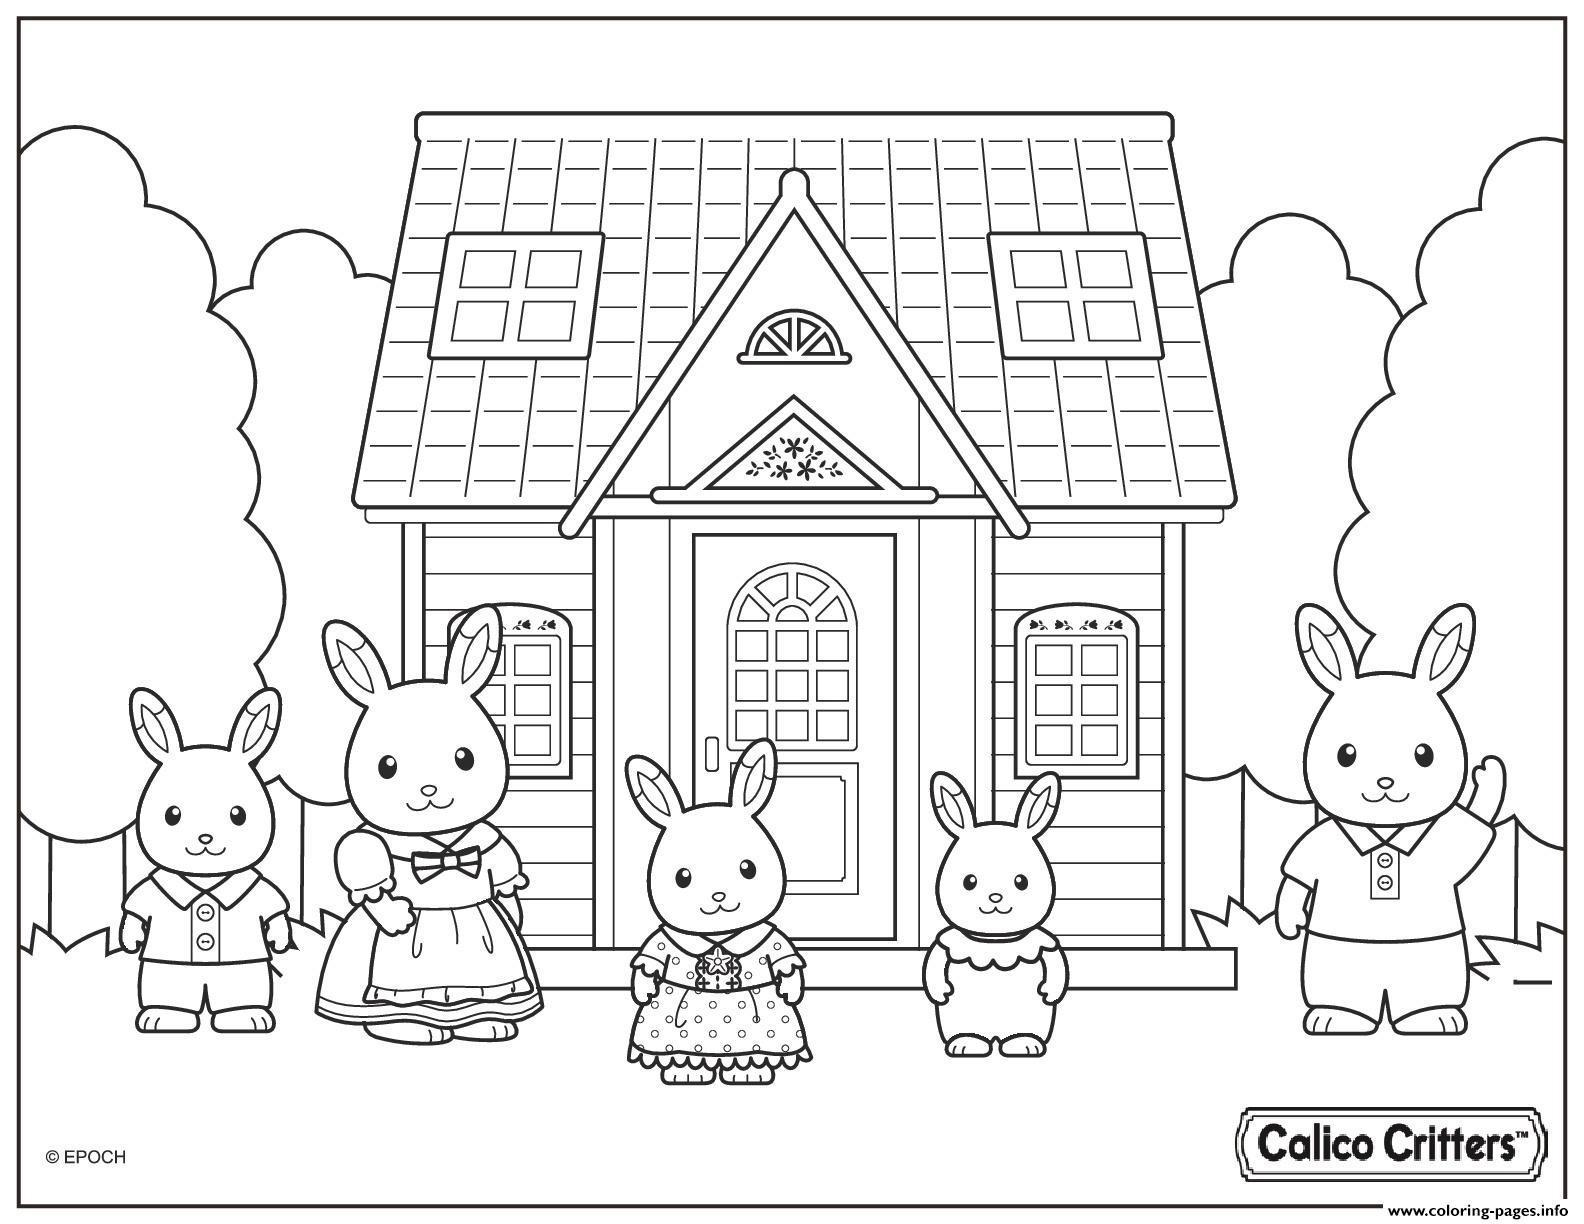 Calico Critters Coloring Pages
 Calico Critters Cute Family Coloring Pages Printable